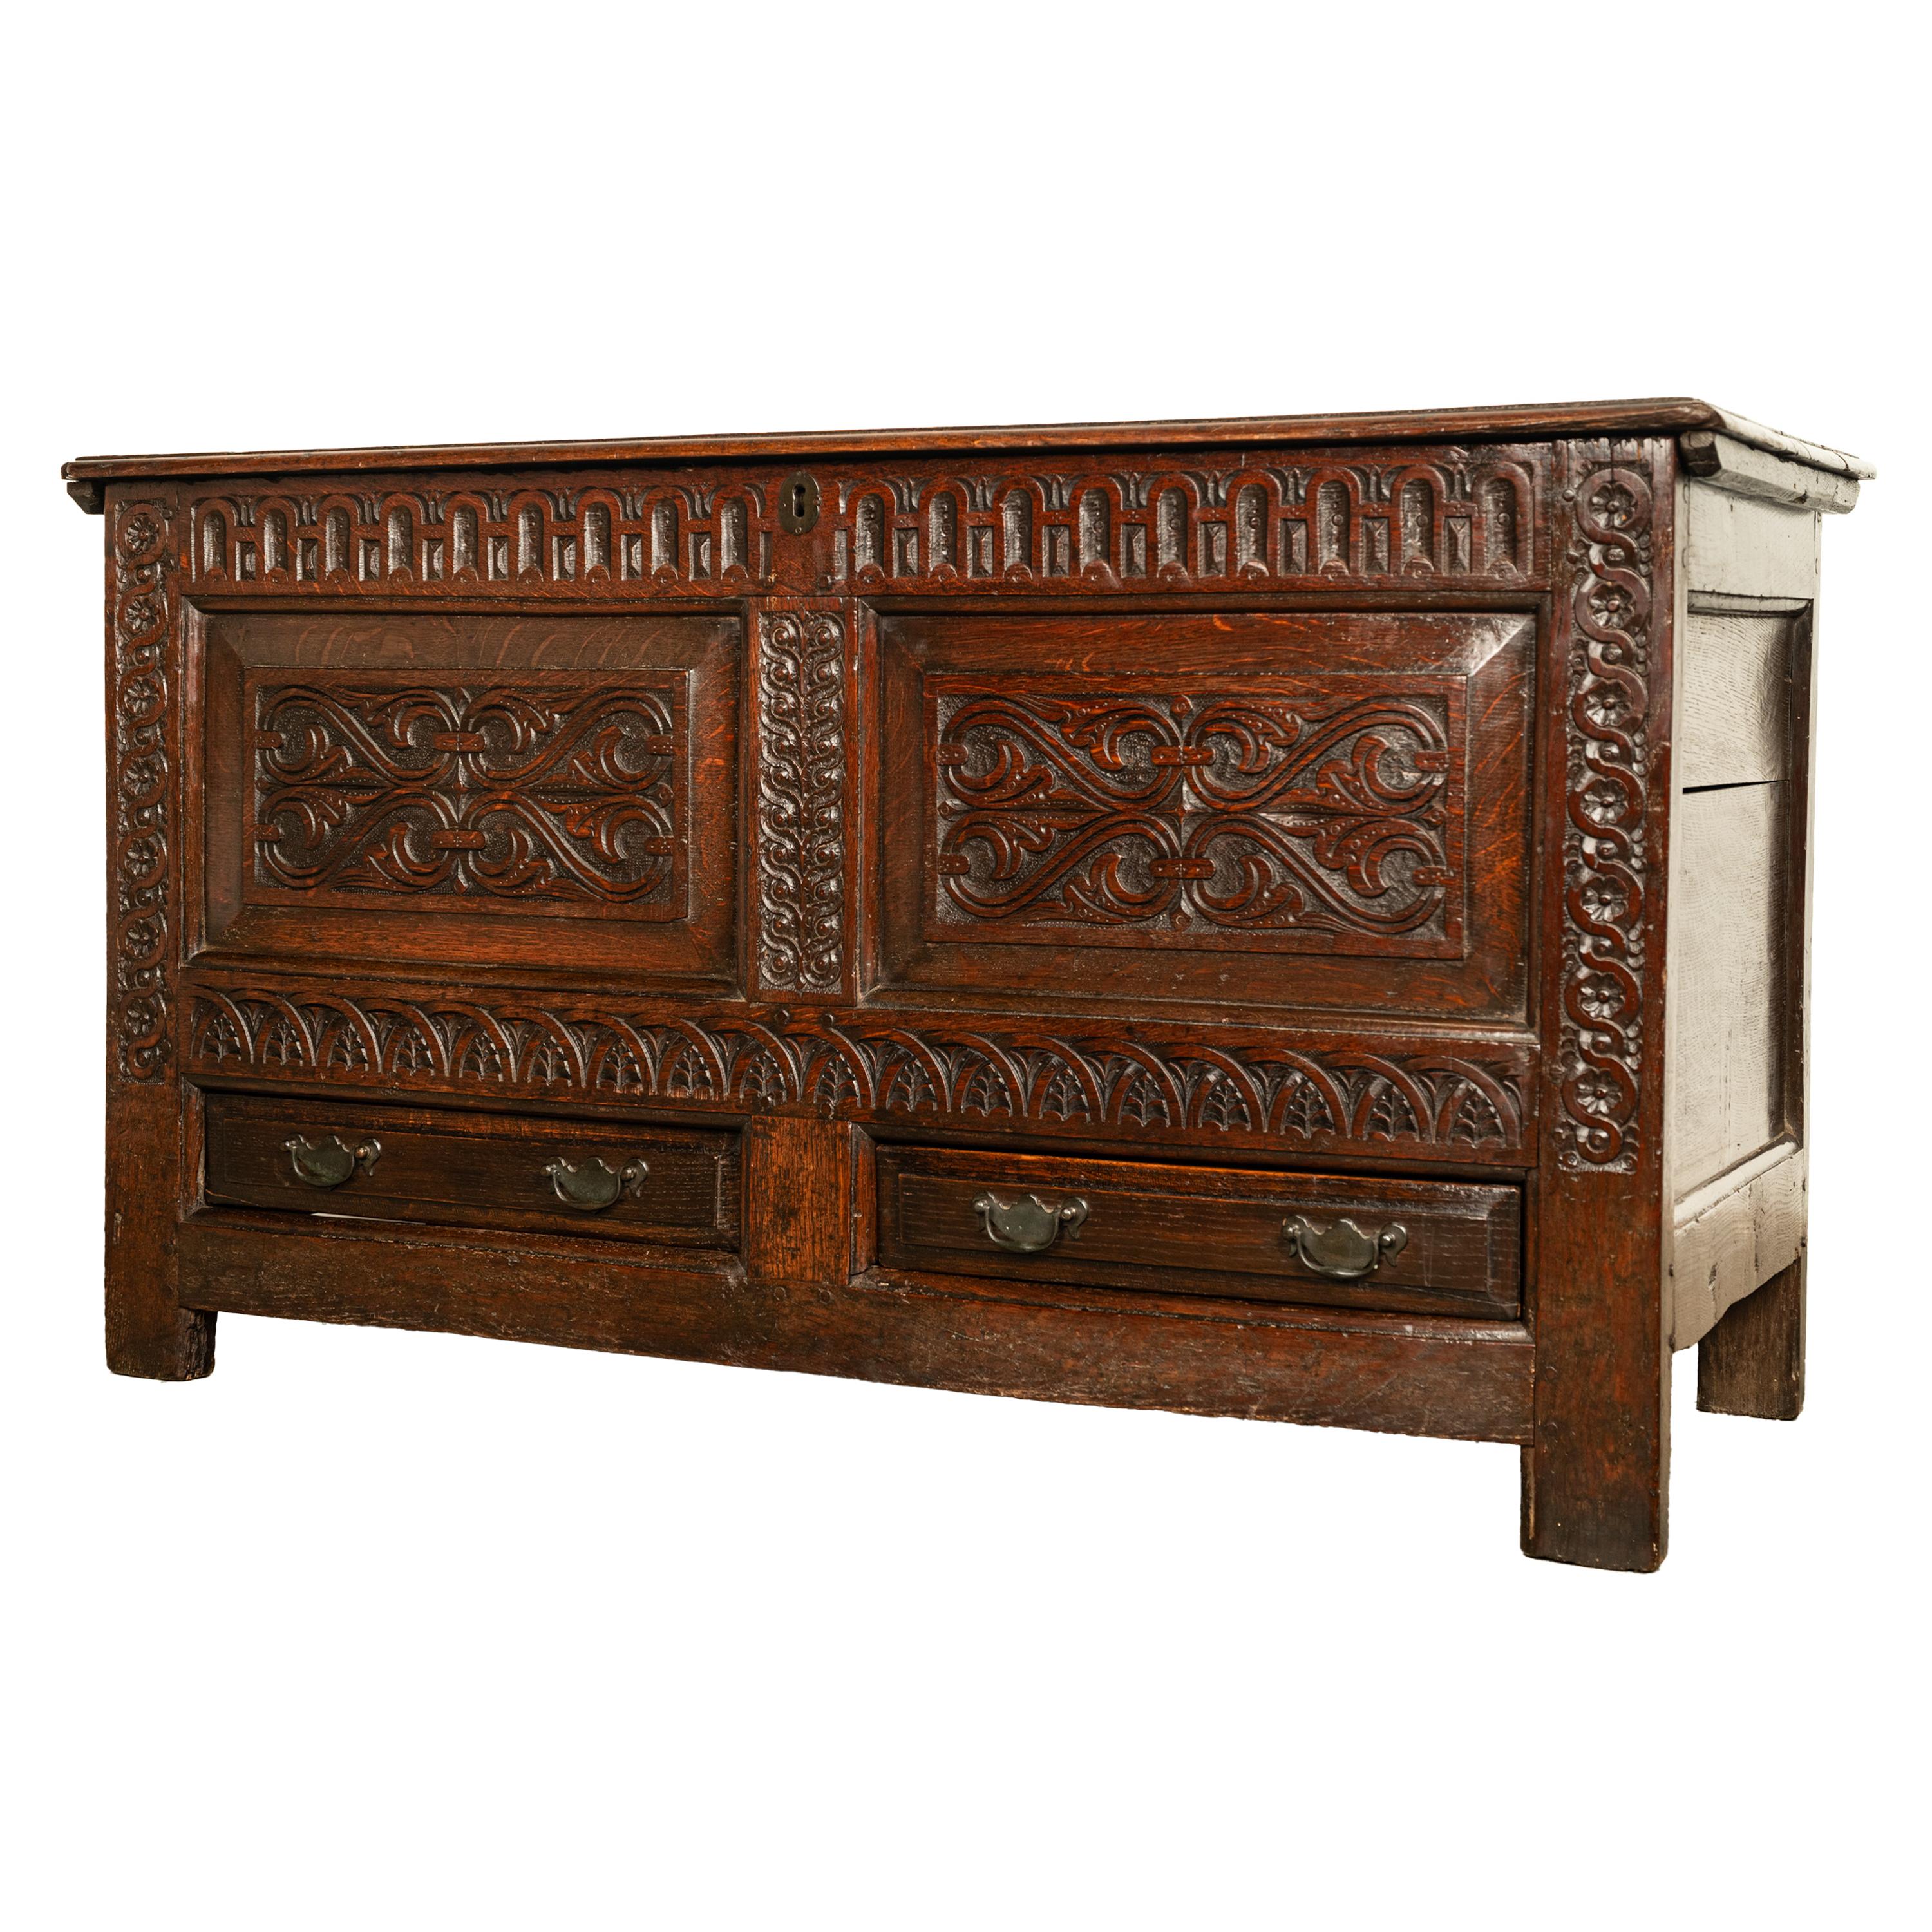  Antique English 17th Century King Charles II Carved Oak Coffer Mule Chest 1680  In Good Condition For Sale In Portland, OR